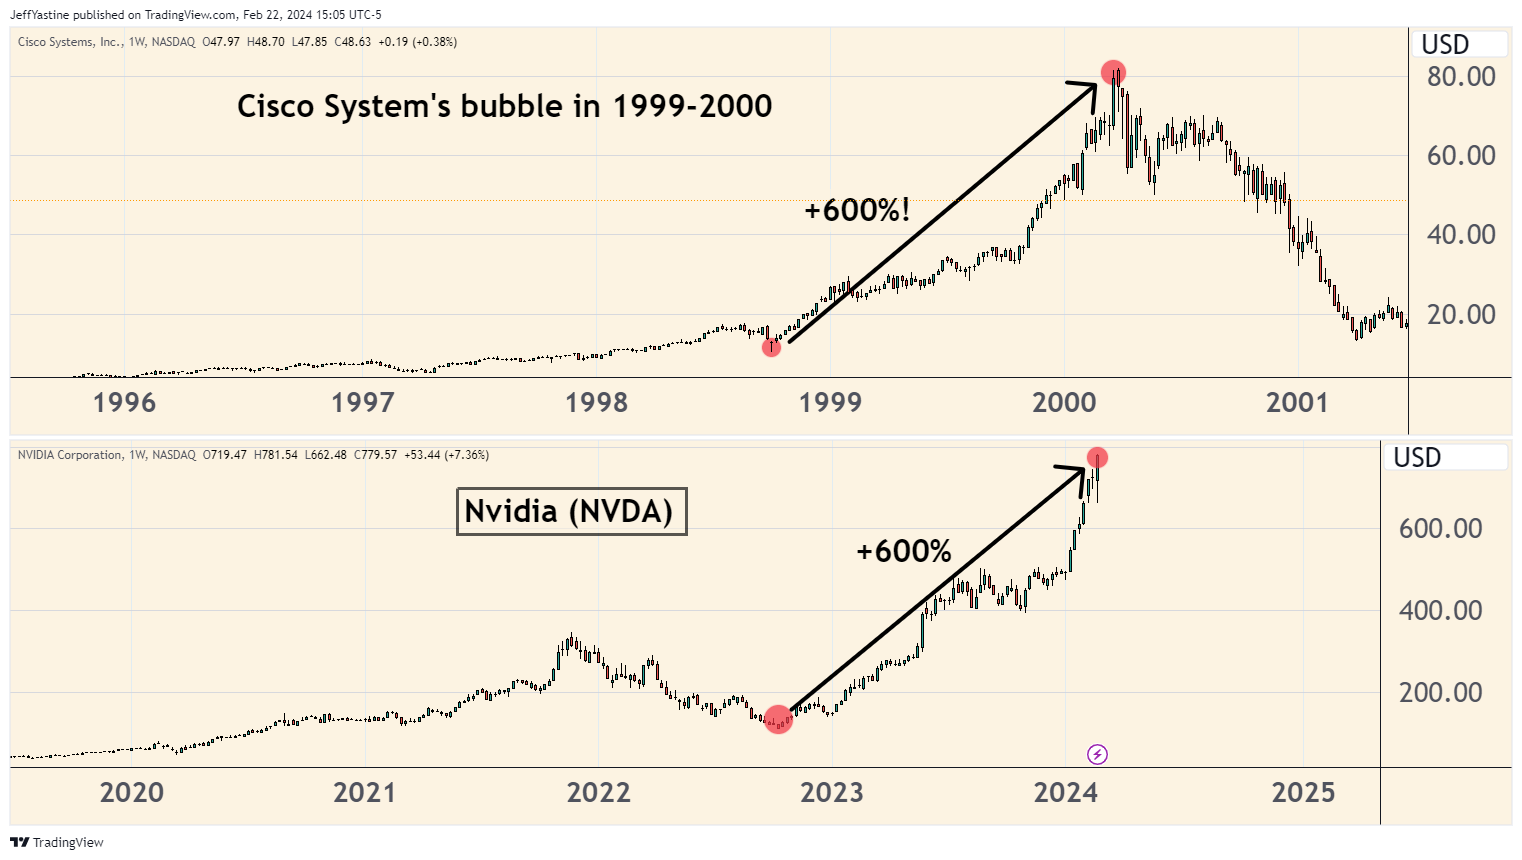 Can We Call this a Bubble?